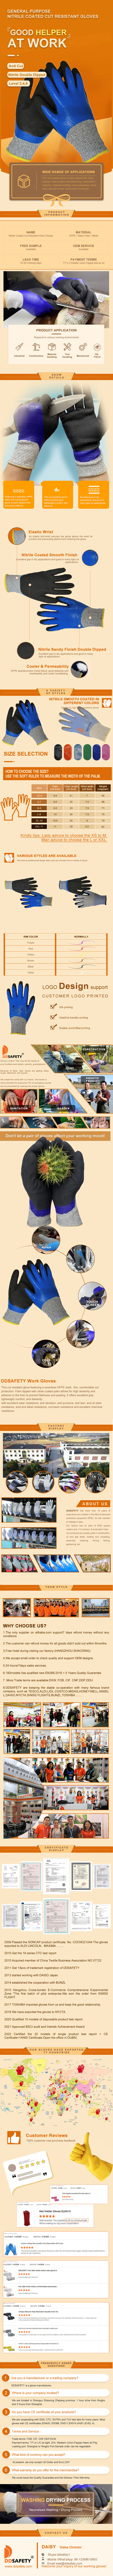 copy of Waterproof Work Gloves, Cut Resistant Gloves With Insulated Double Latex Plam Coated - DCR622 Waterproof Work Gloves, Cut Resistant Gloves With Insulated Double Latex Plam Coated - DCR622 gloves,cut resistant gloves,nitrile coated gloves,Waterproof Work Gloves,Insulated Palm Coated Gloves